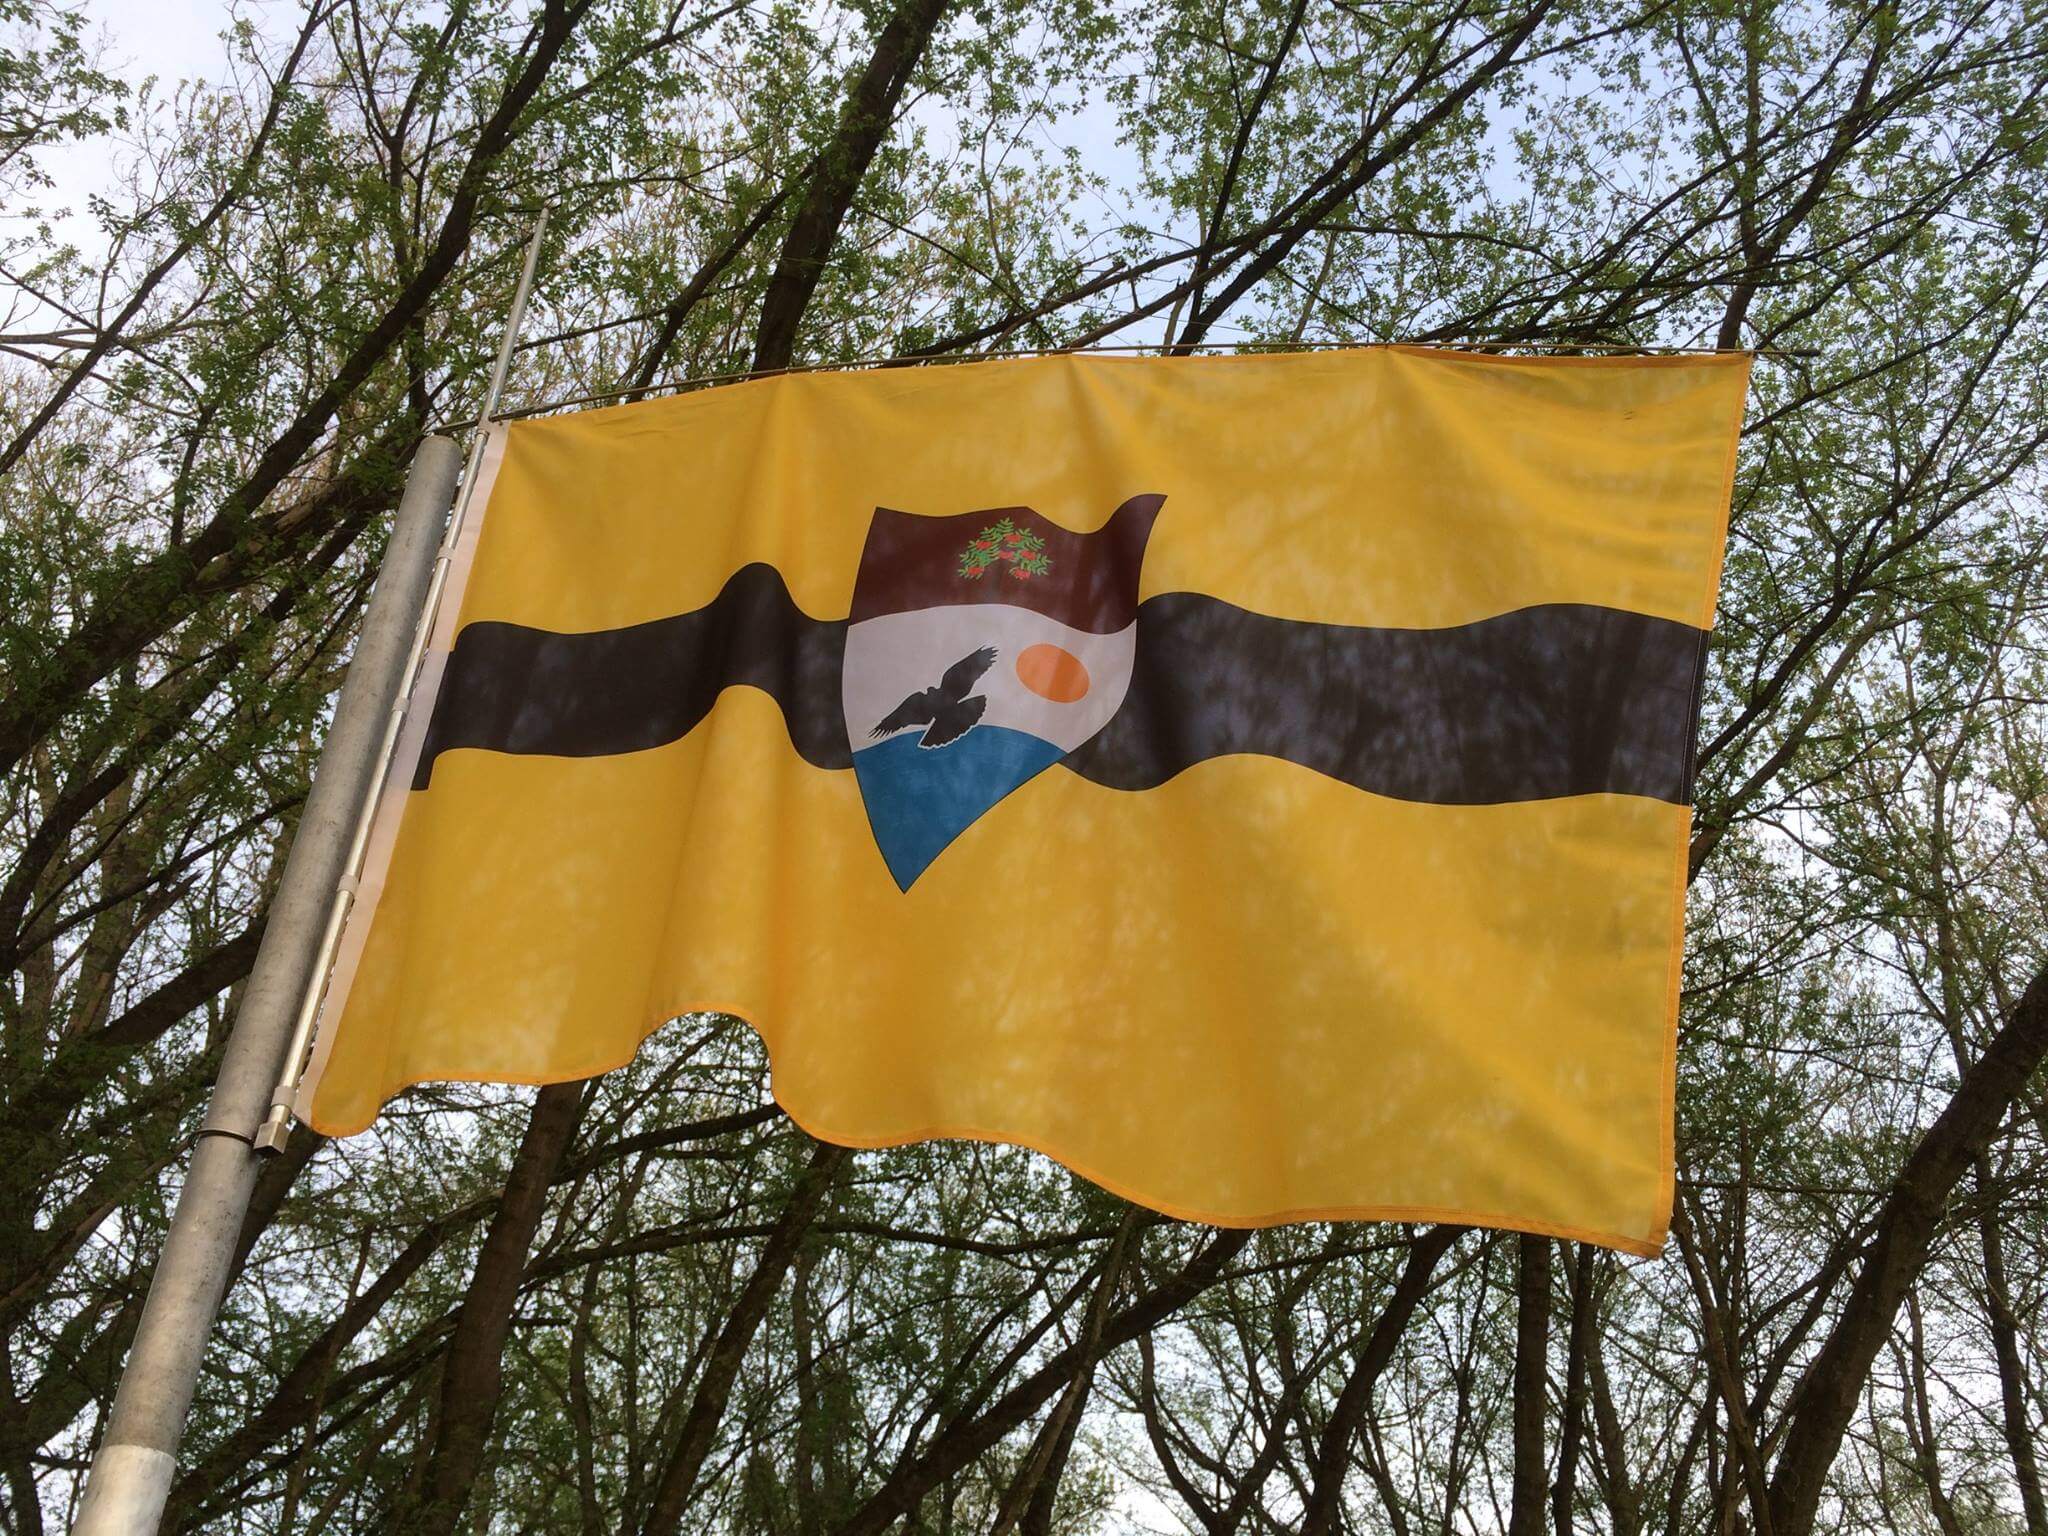 Meet Liberland: New European Microcountry Where Bitcoin Will be the National Currency